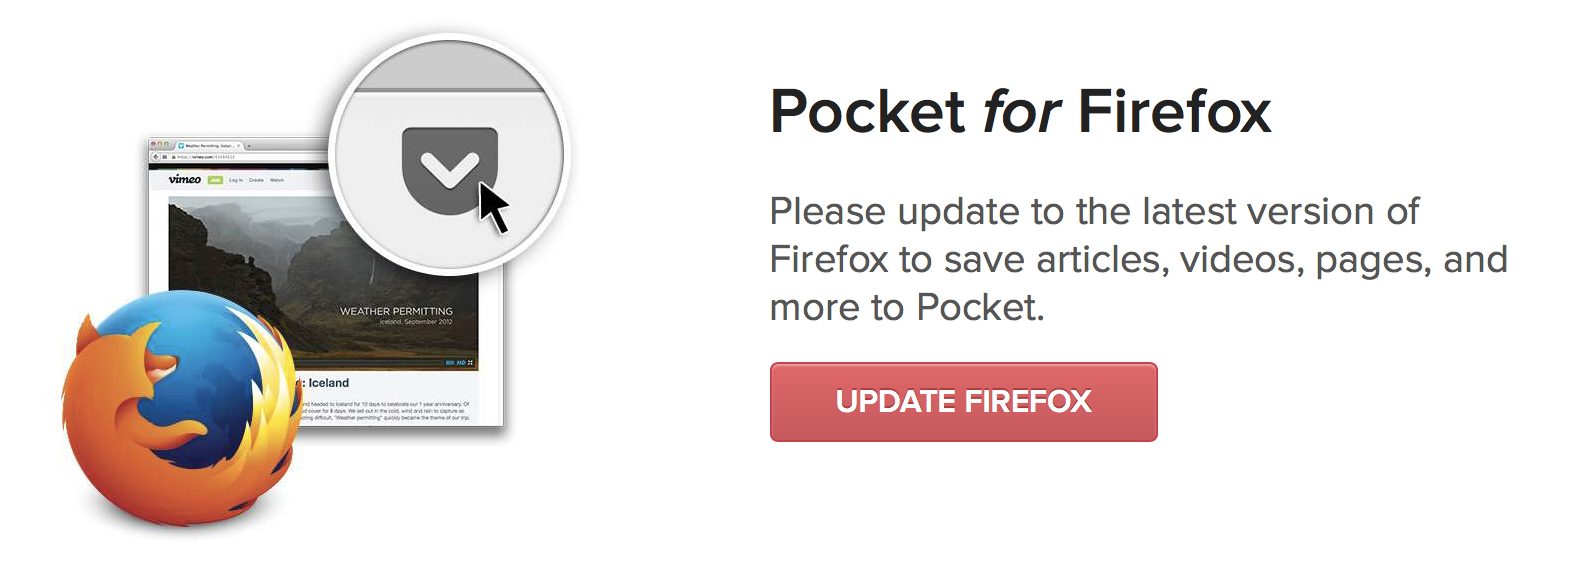 firefox pocket android